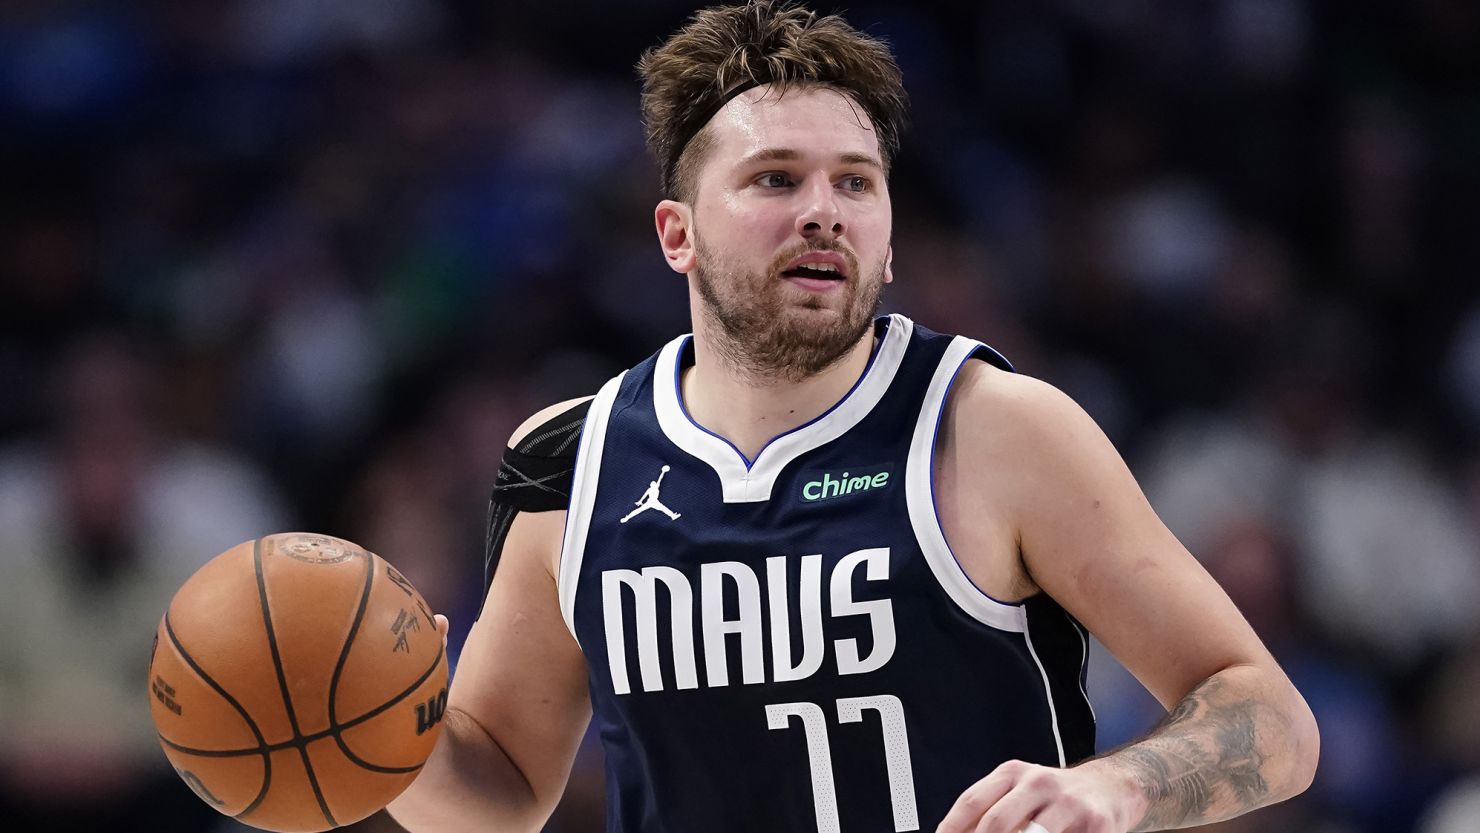 On the Mavs 3-Pointers Made List, Luka Doncic Moves up to Second Place Above Jason Terry